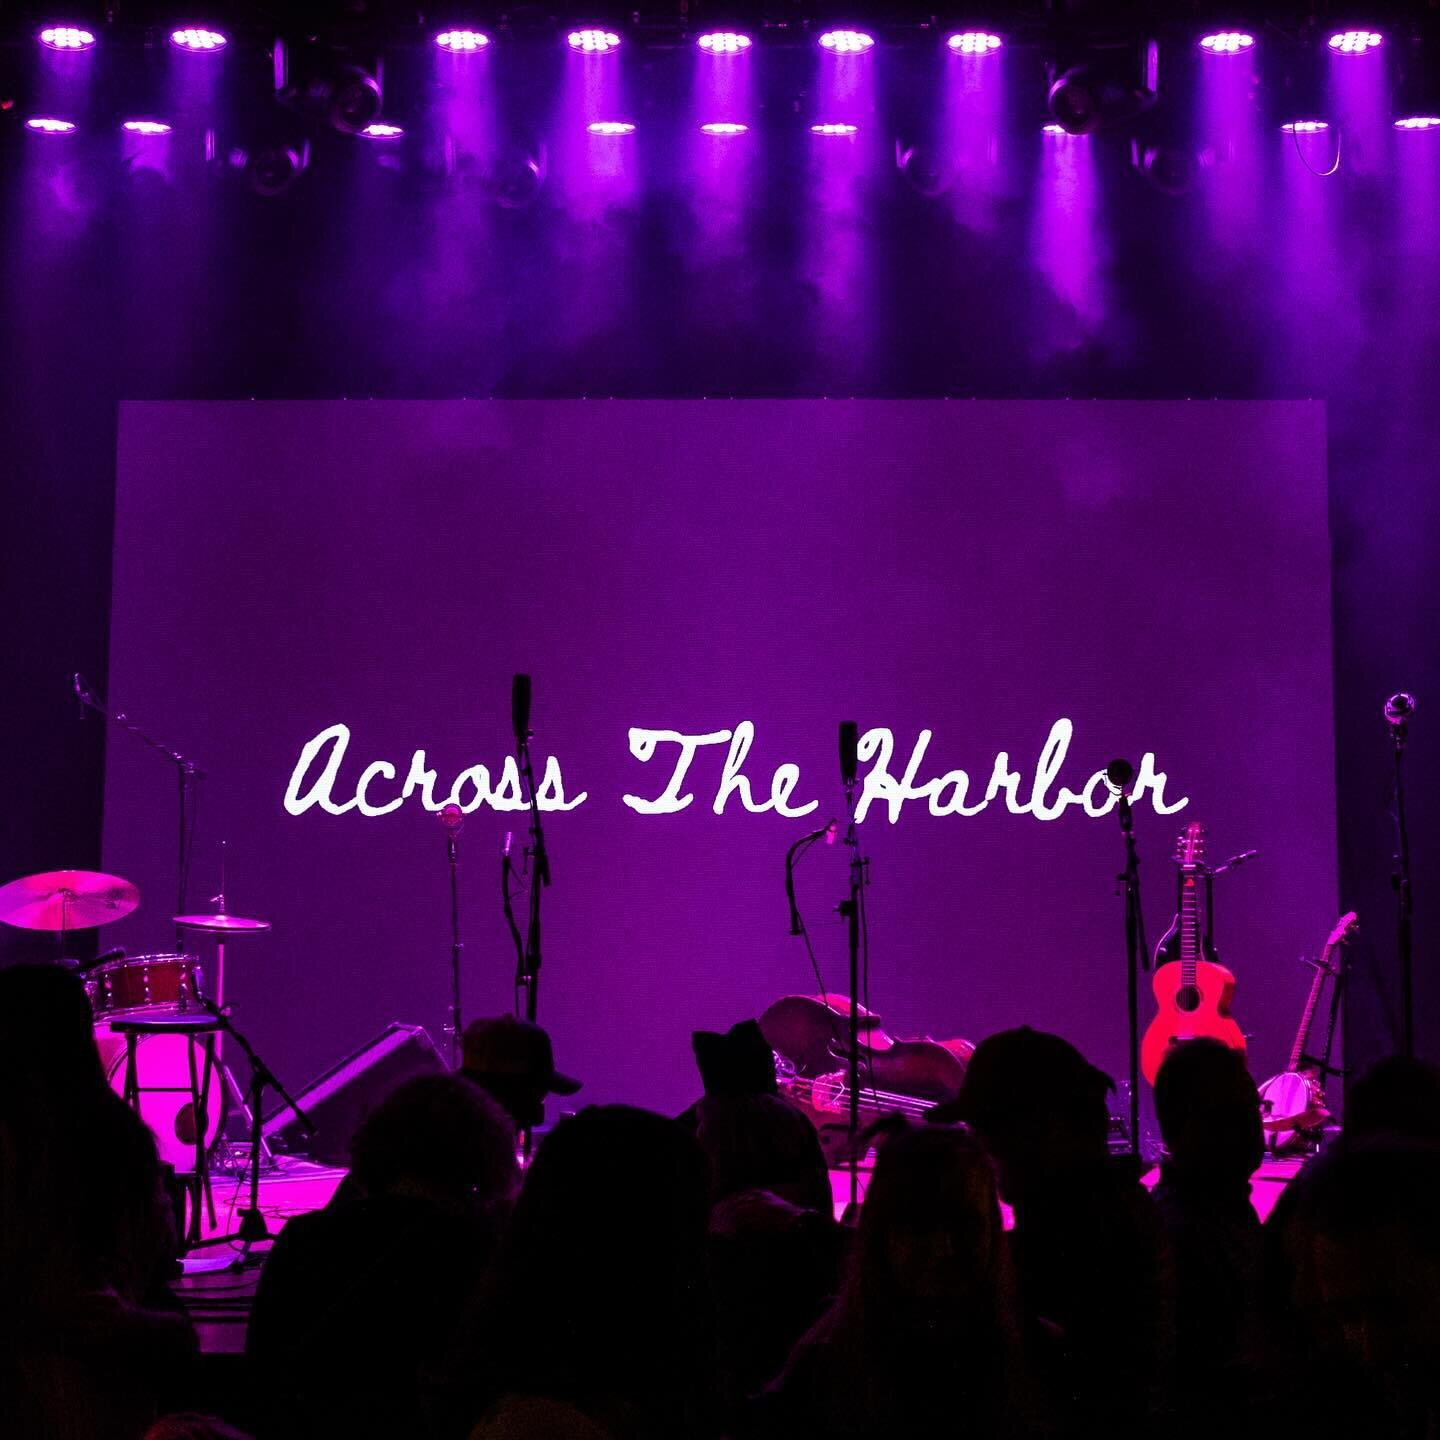 This was an epic weekend with the Across the Harbor crew. This was our third year of running these shows. I&rsquo;m feeling so thankful for the inspiration that this group provides. It&rsquo;s healing to the soul. Here&rsquo;s some gorgeous pictures 